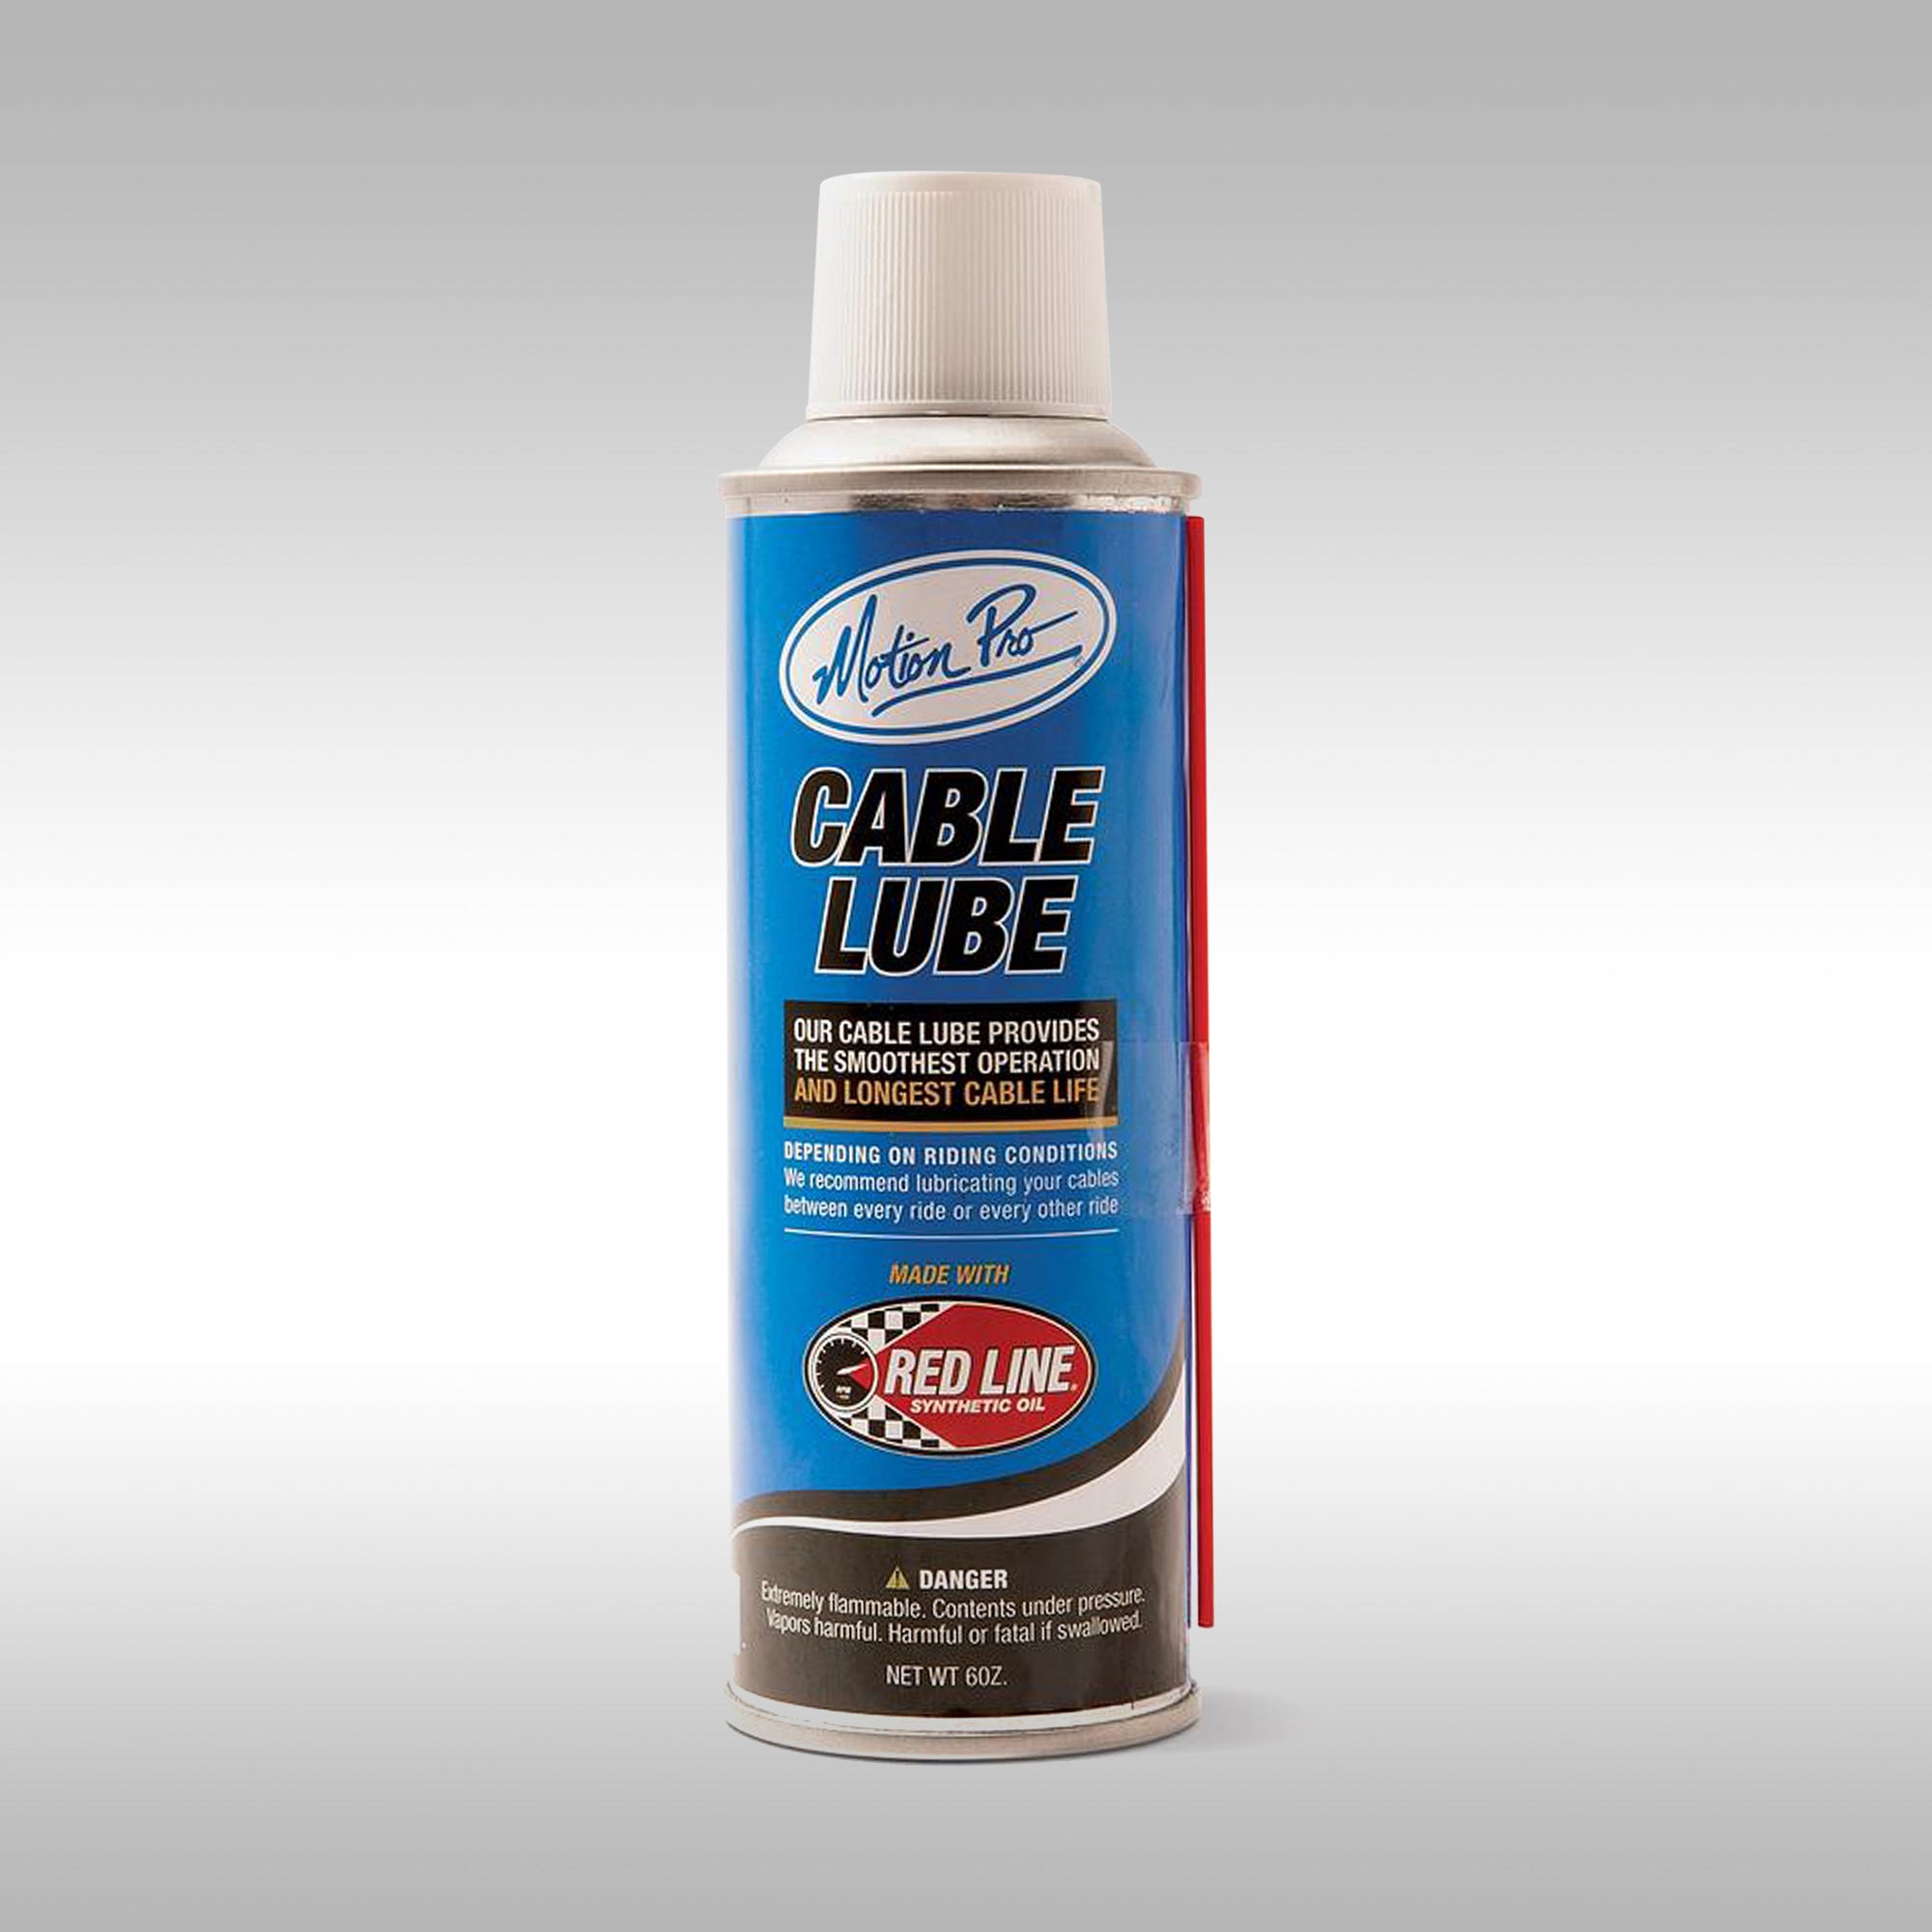 6 ounce can of Motion Pro cable lube. Synthetic cable lube formula specialy developed for motorcycle control throttle and brake cables.